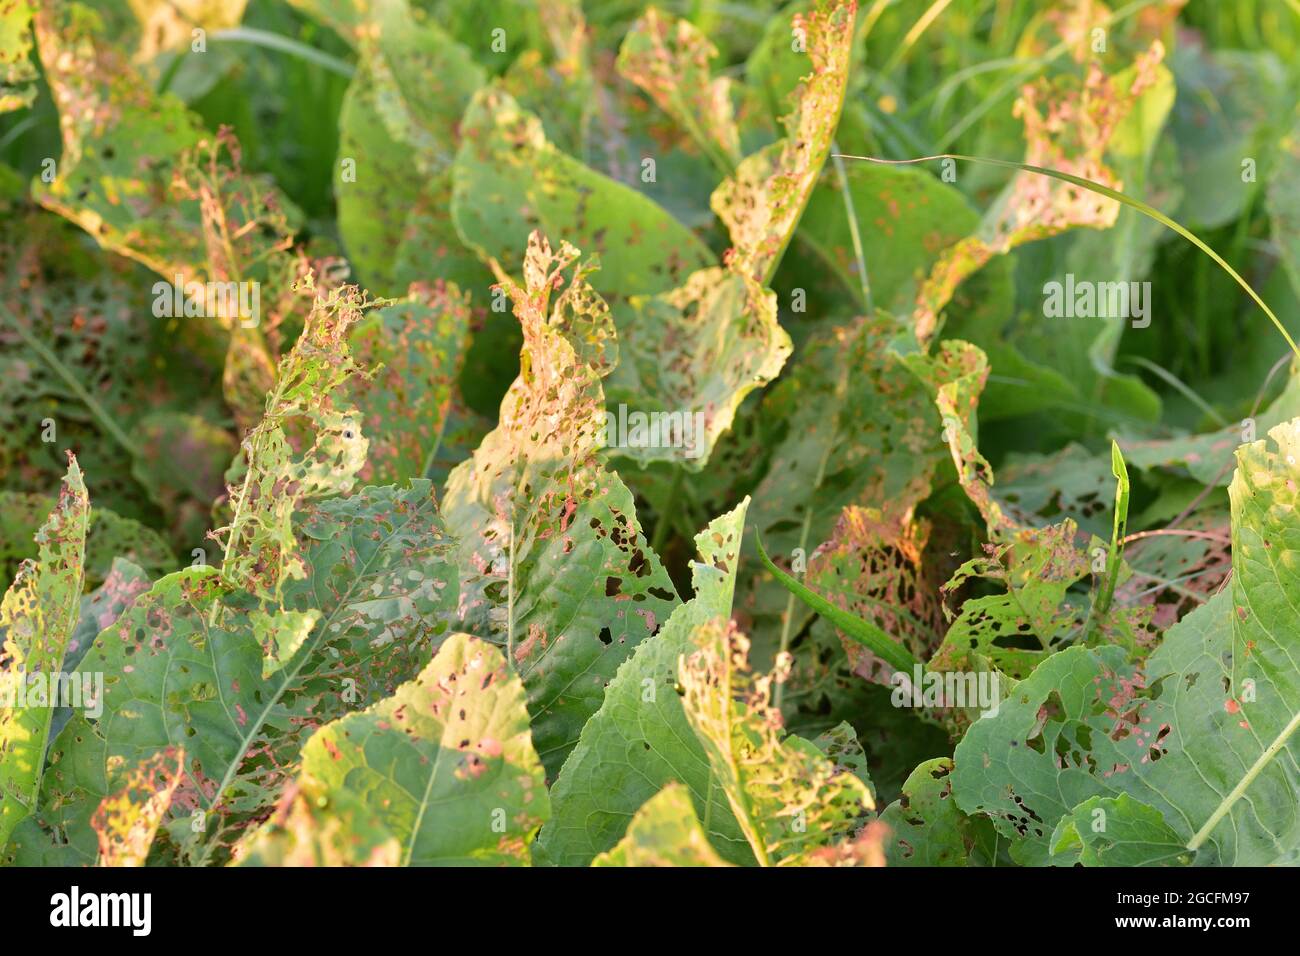 Wild horseradish gliding among the clover in the light of the setting sun. Stock Photo